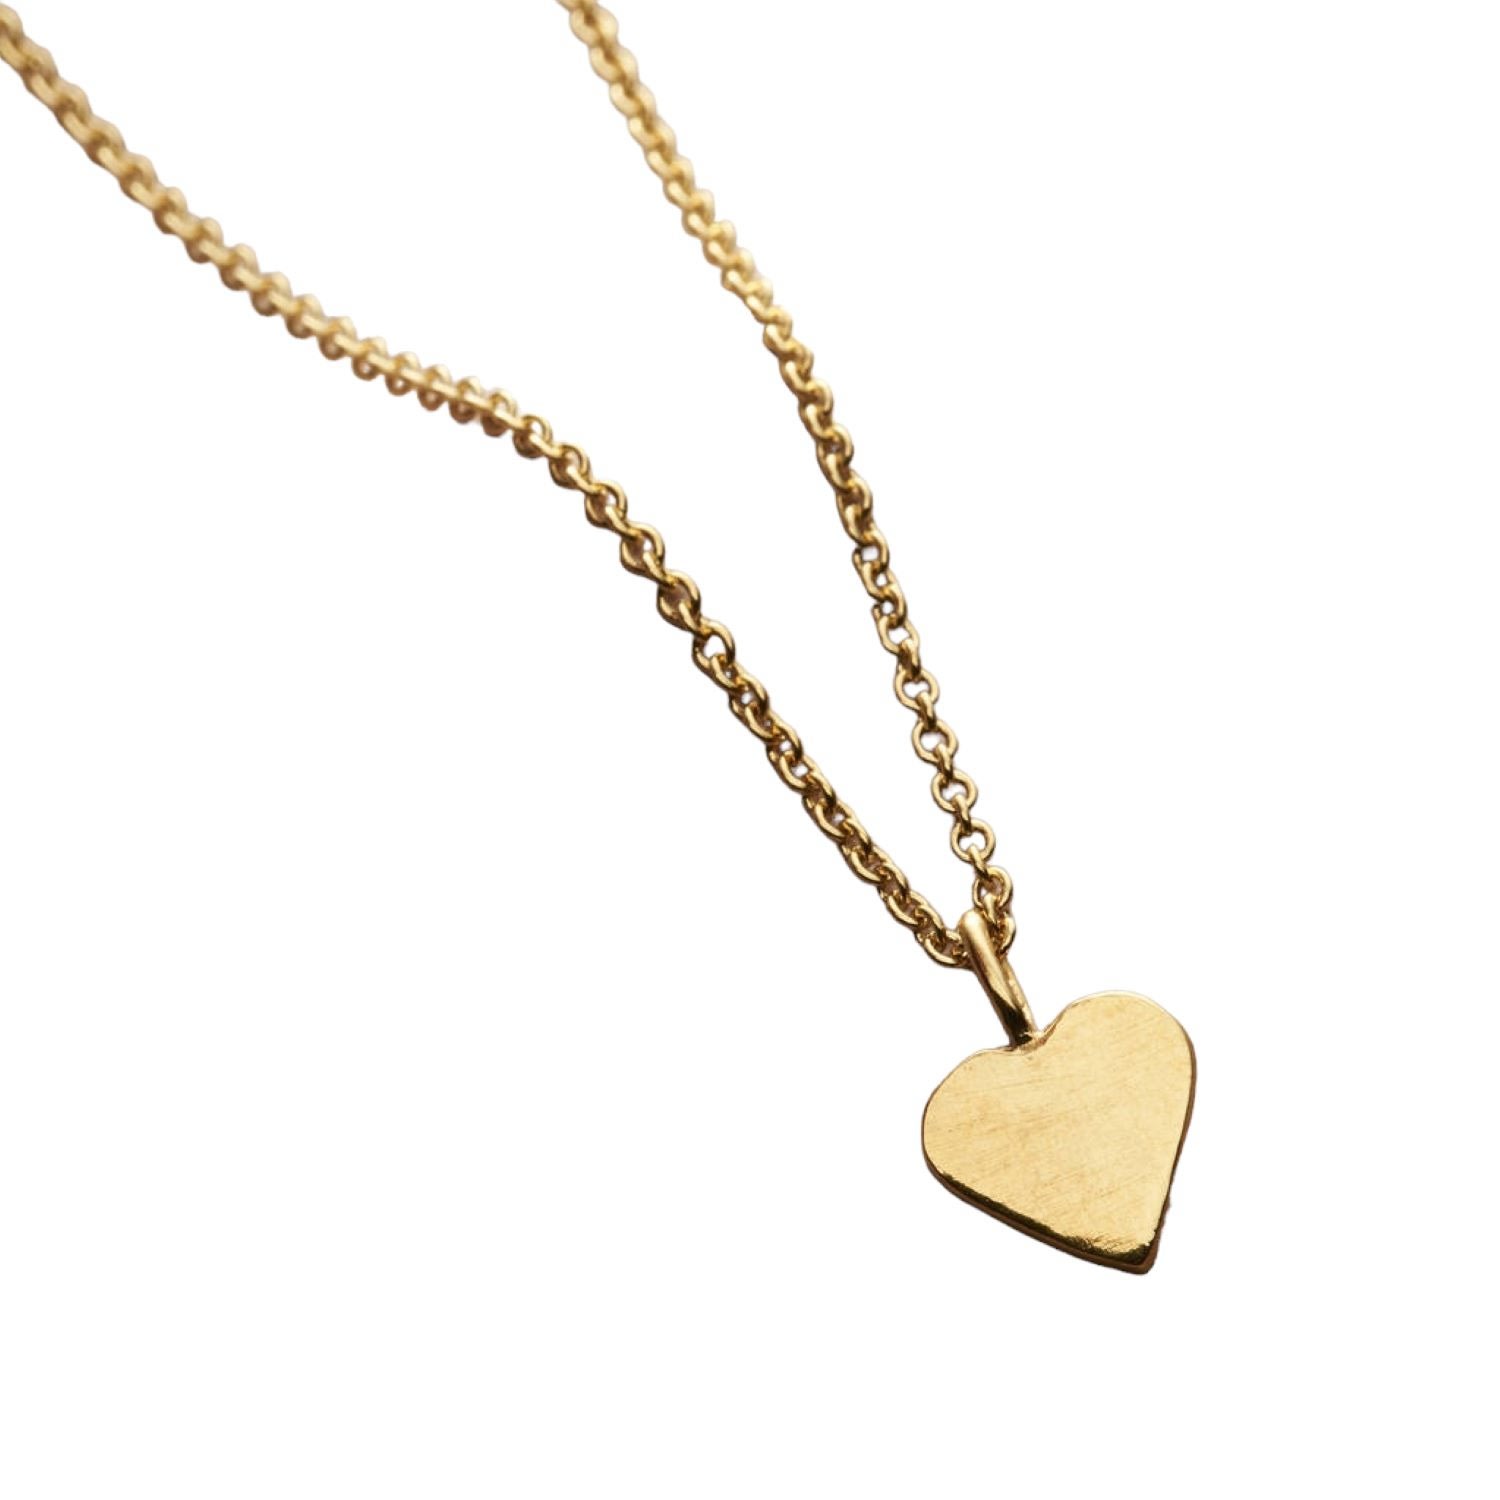 Women’s Yellow Gold Plated Mini Heart Charm Necklace Posh Totty Designs